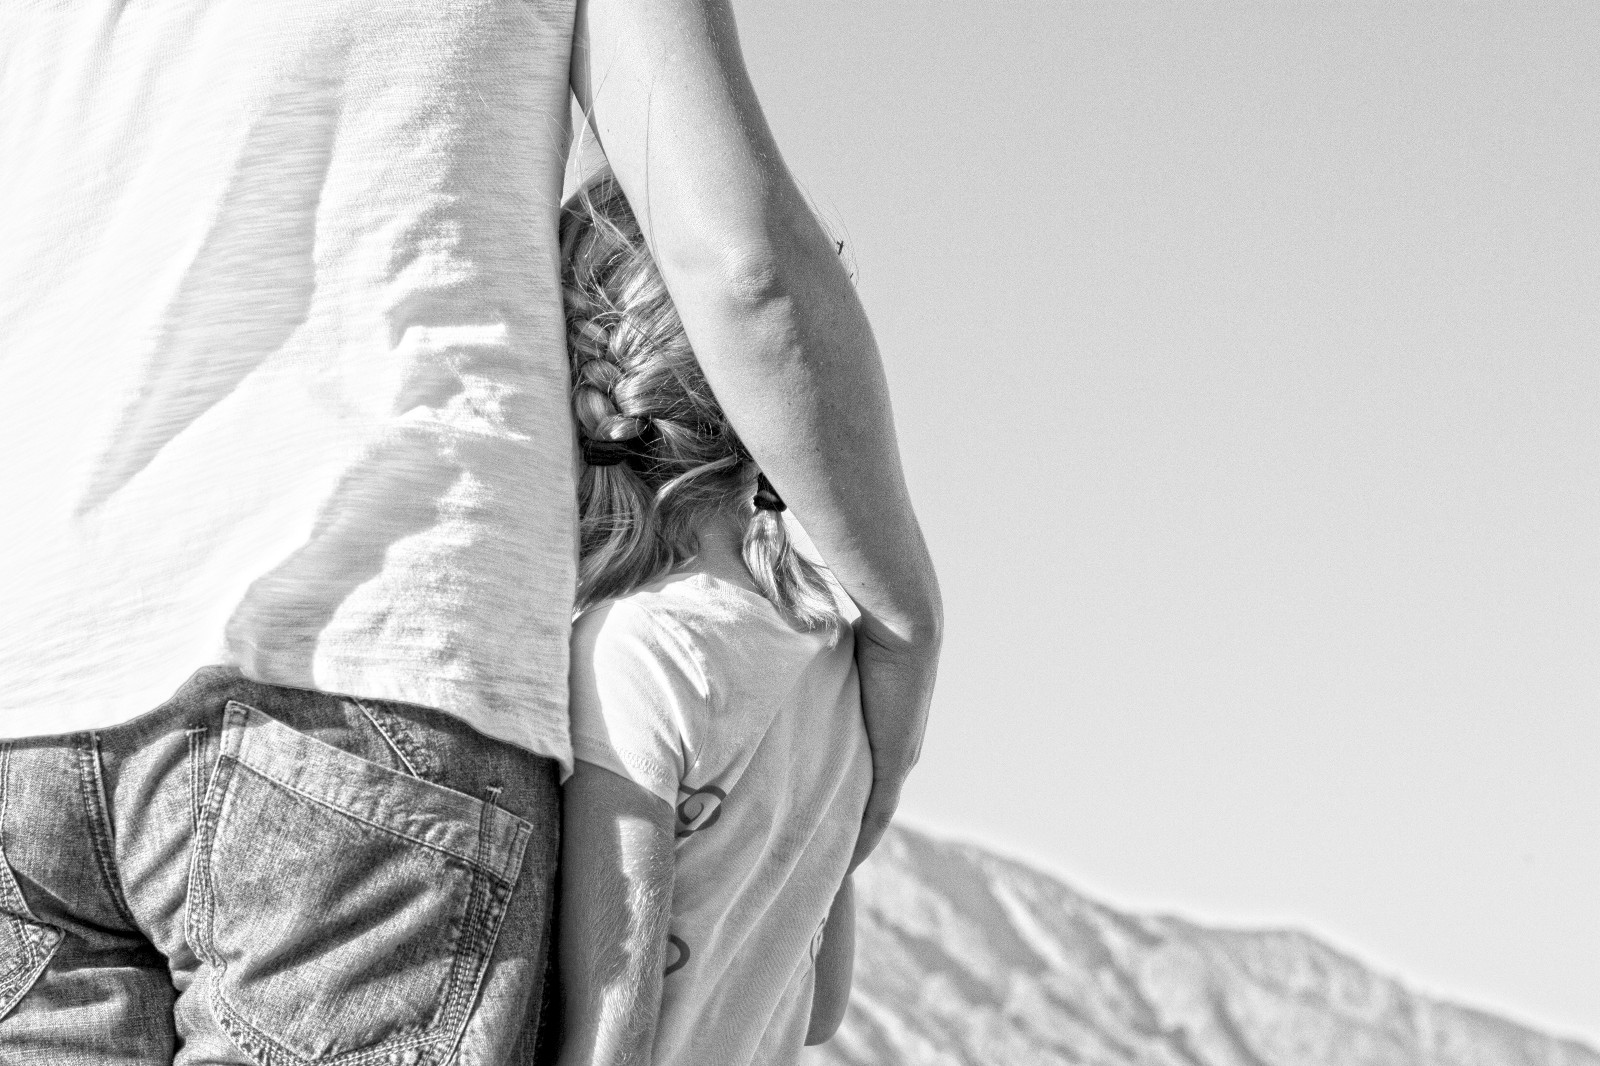 Father and daughter looking off into the distance in a half hug embrace. Black and White photo.